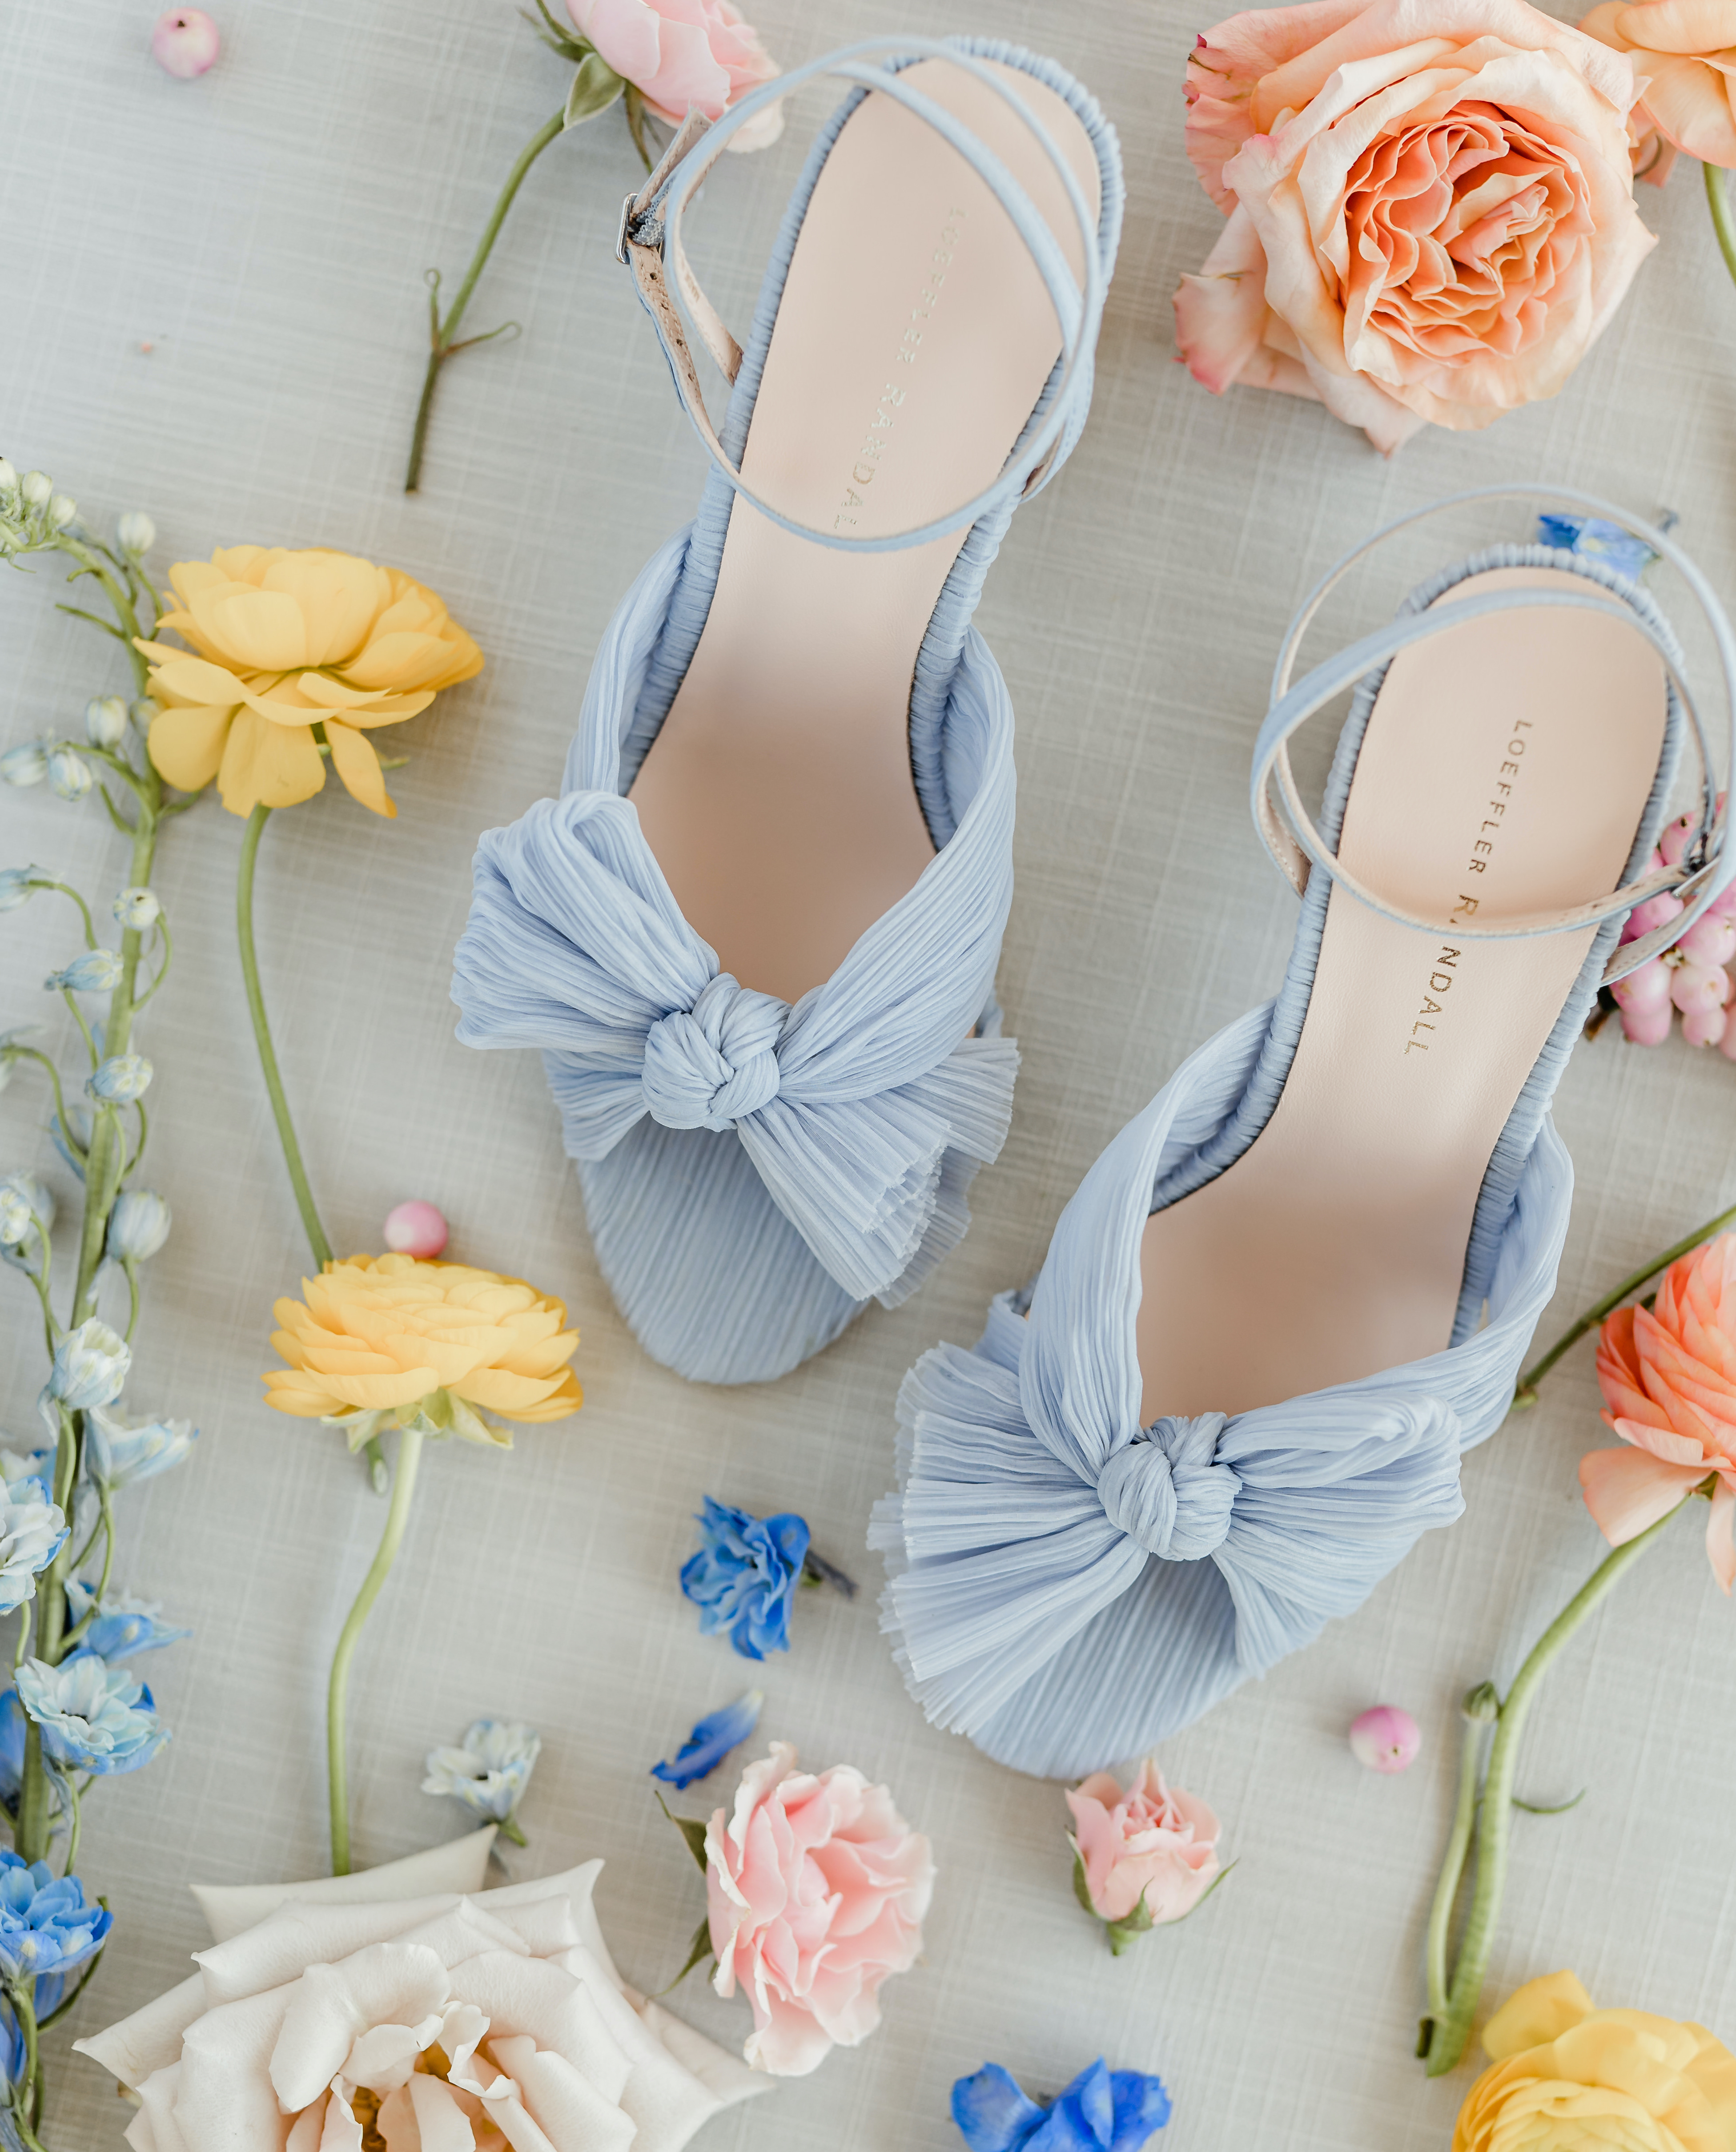 Styleguide For The Bride: Eight Stunning Bridal Shoes For The Aisle